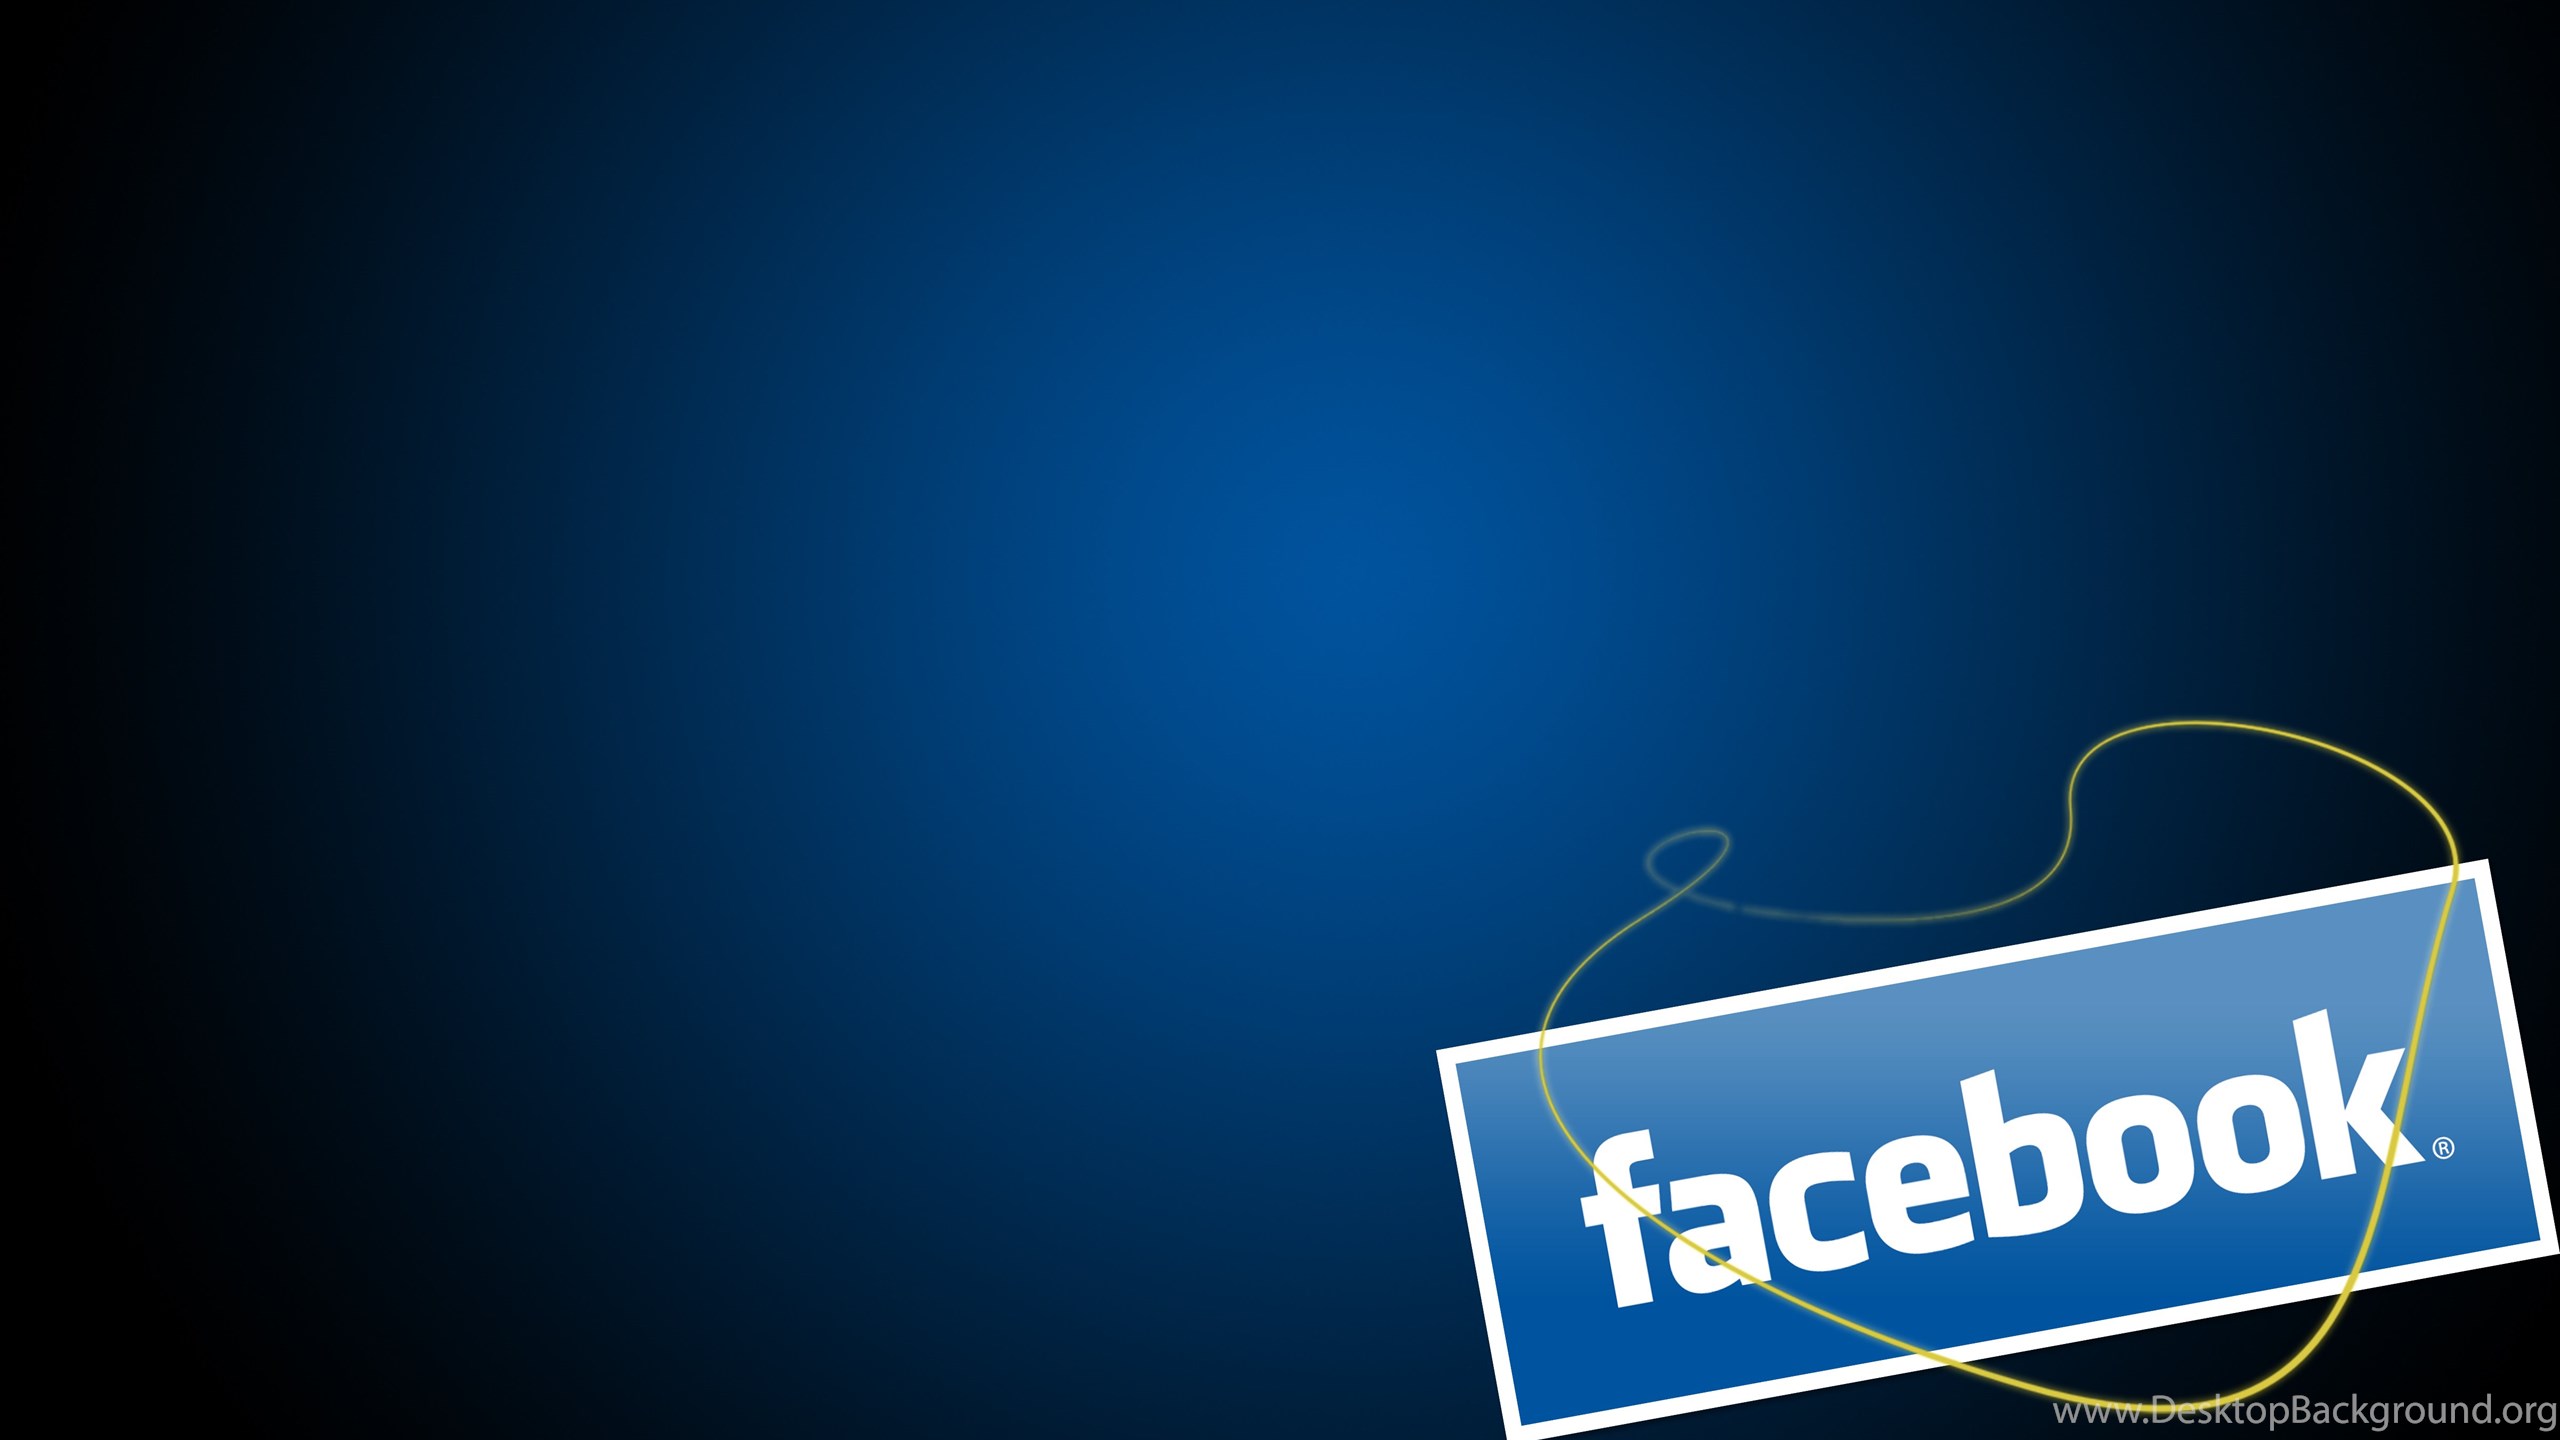 Facebook Wallpapers HD Wallpaper Backgrounds Of Your Choice